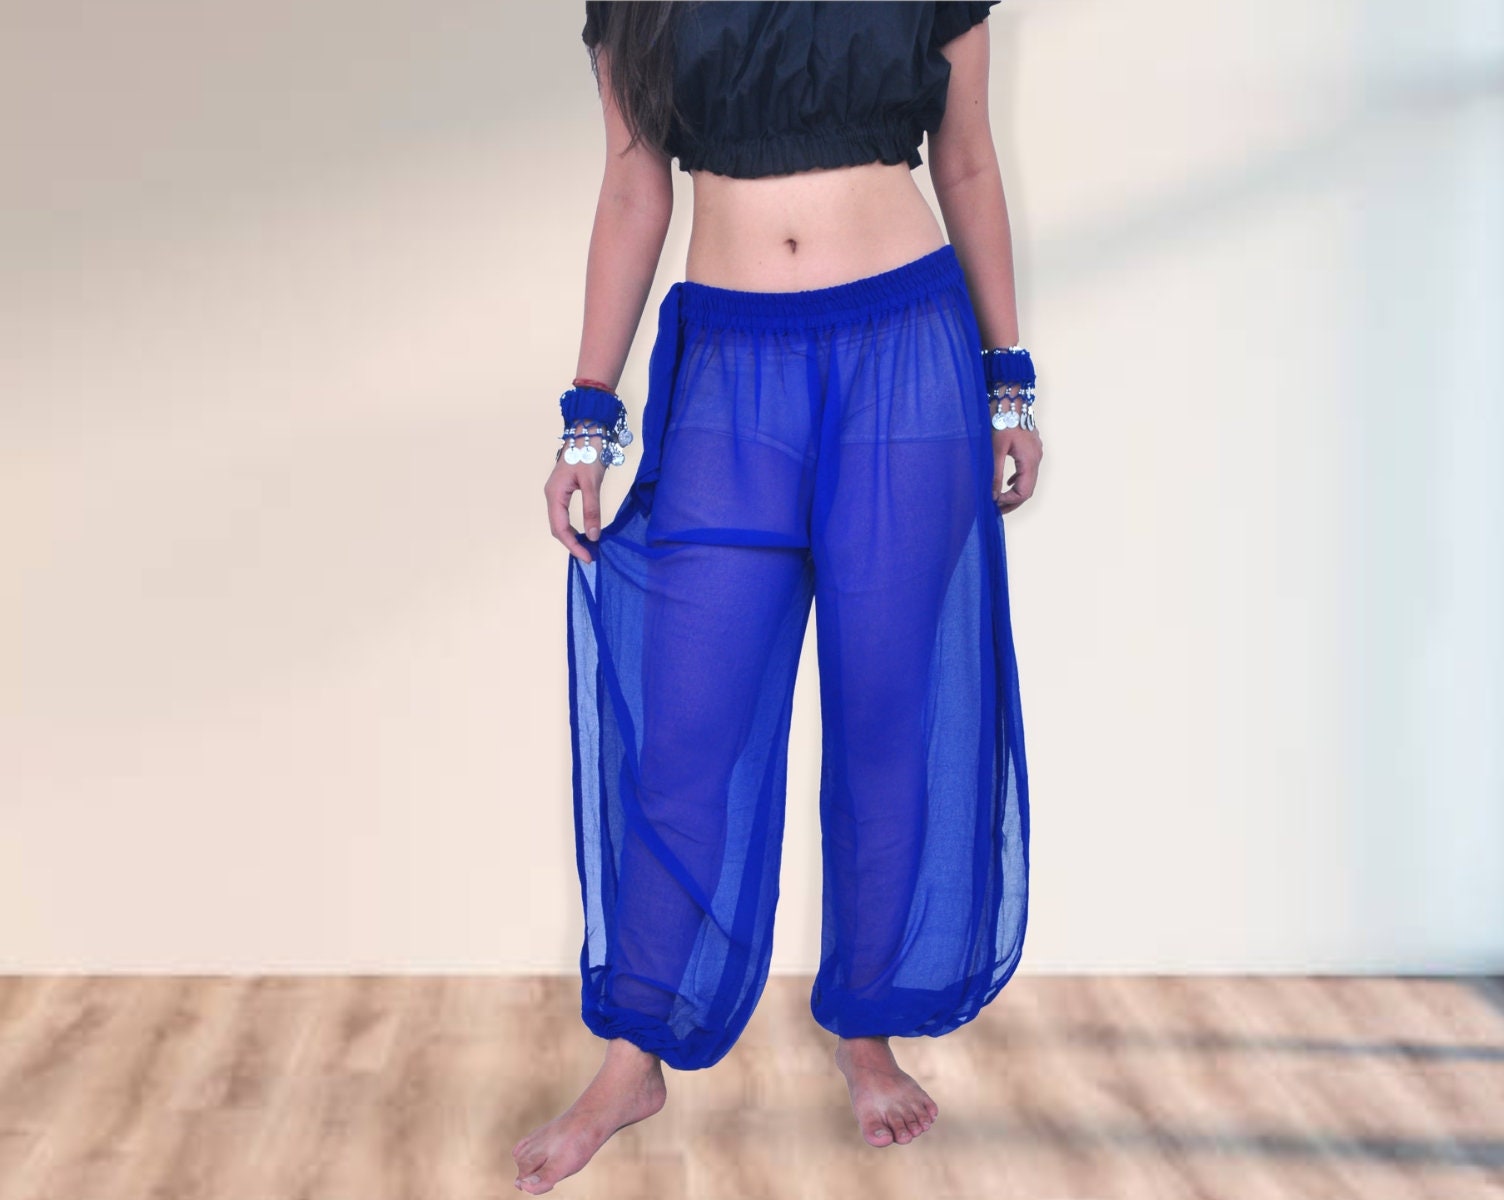 Low belly dance pants / training pants in fuchsia pink